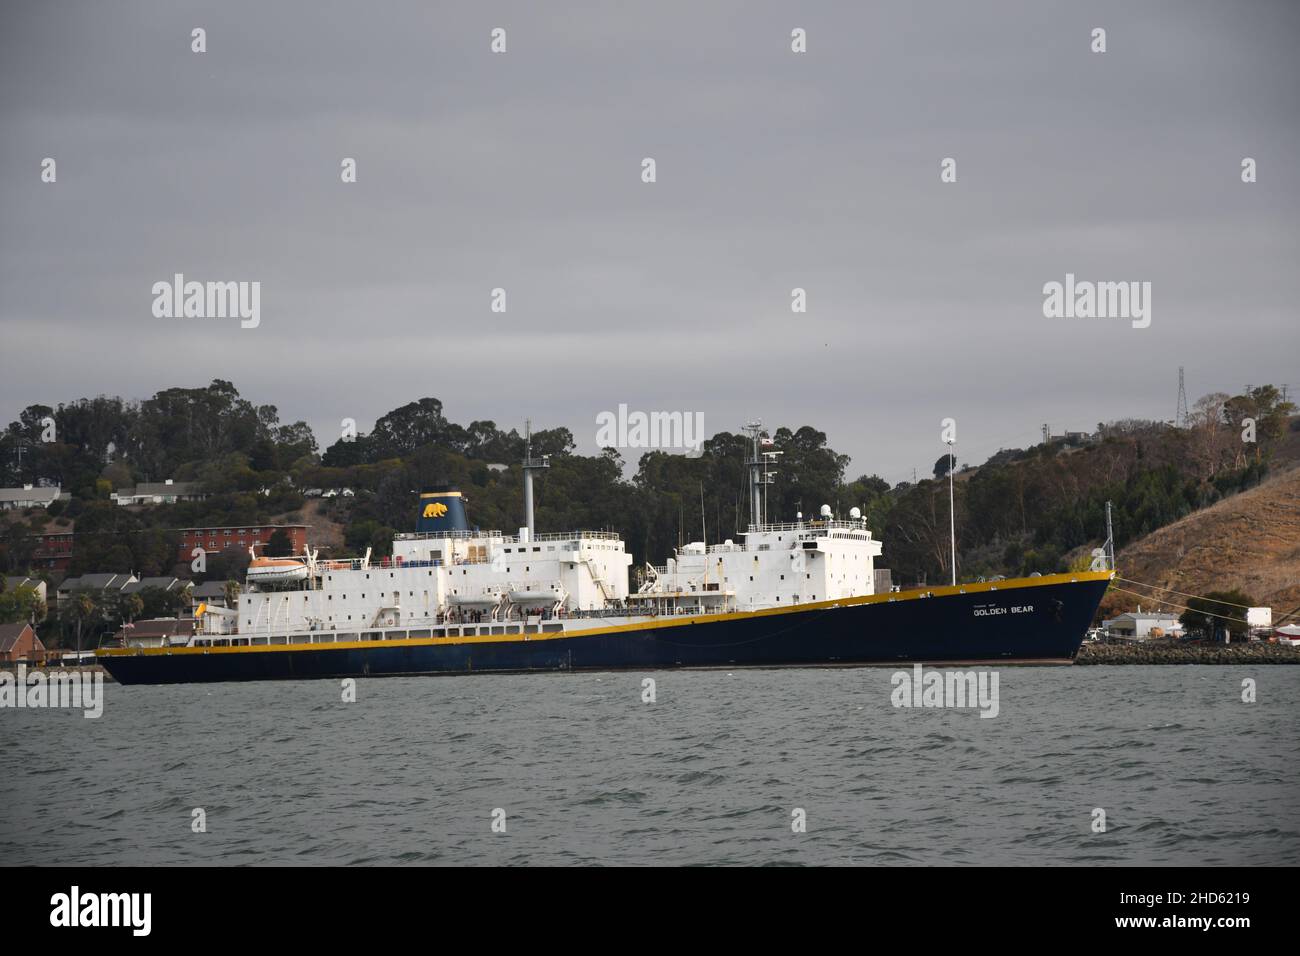 Training Ship Golden Bear. Cal Maritime. Commercial freight and container ships in San Francisco and San Pablo Bay, California Stock Photo